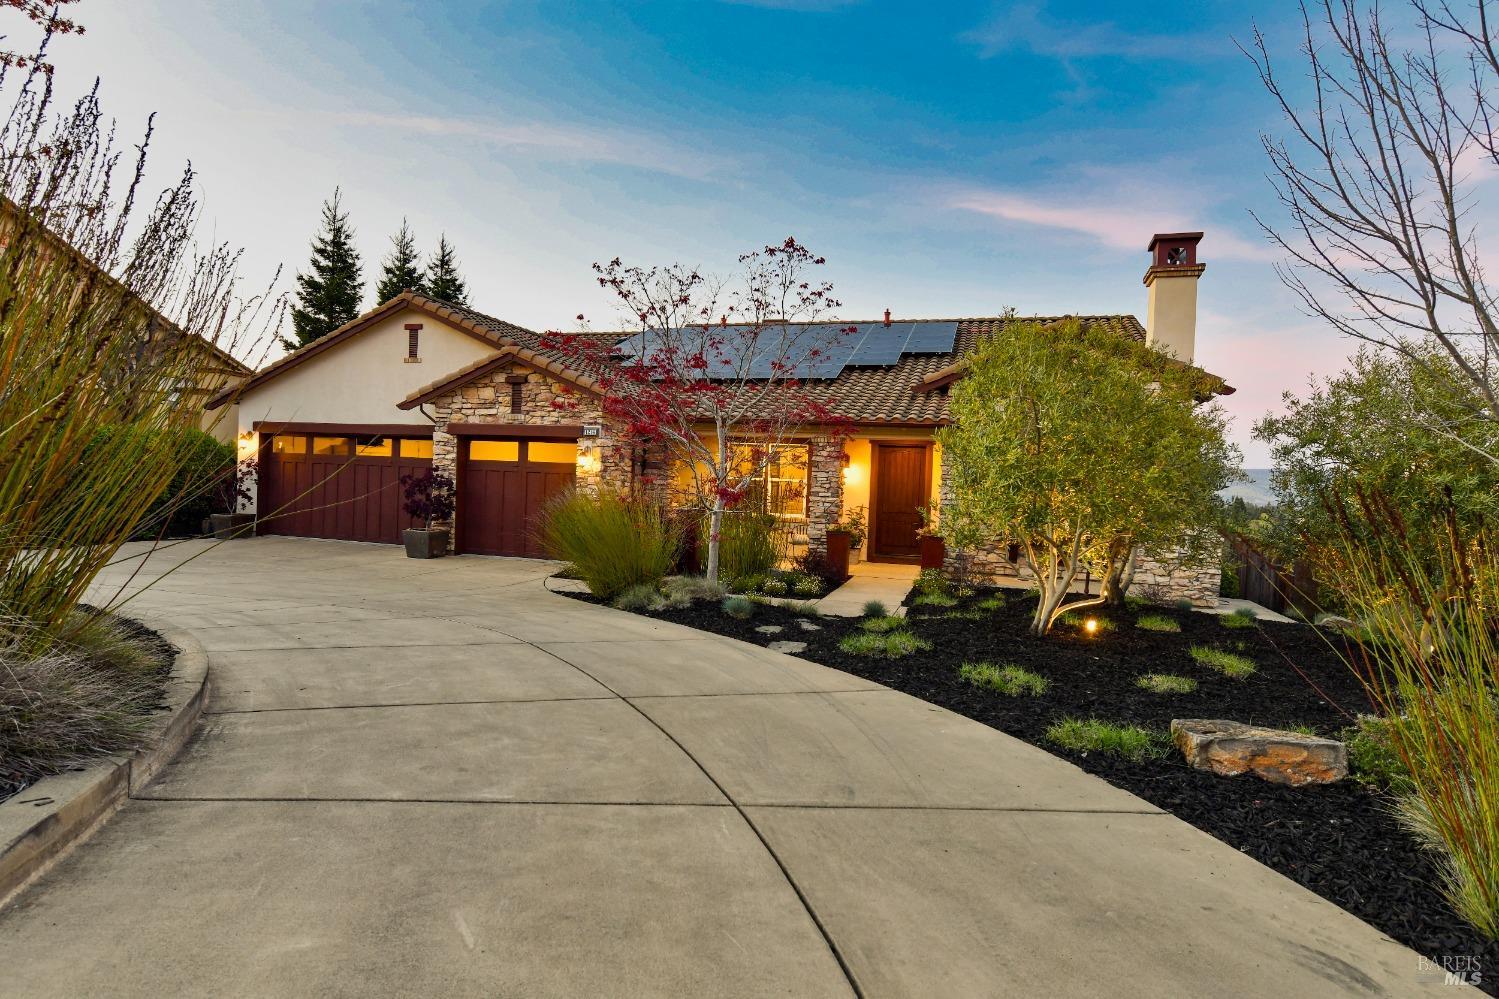 Photo of 1216 Tall Grass Ct in Napa, CA